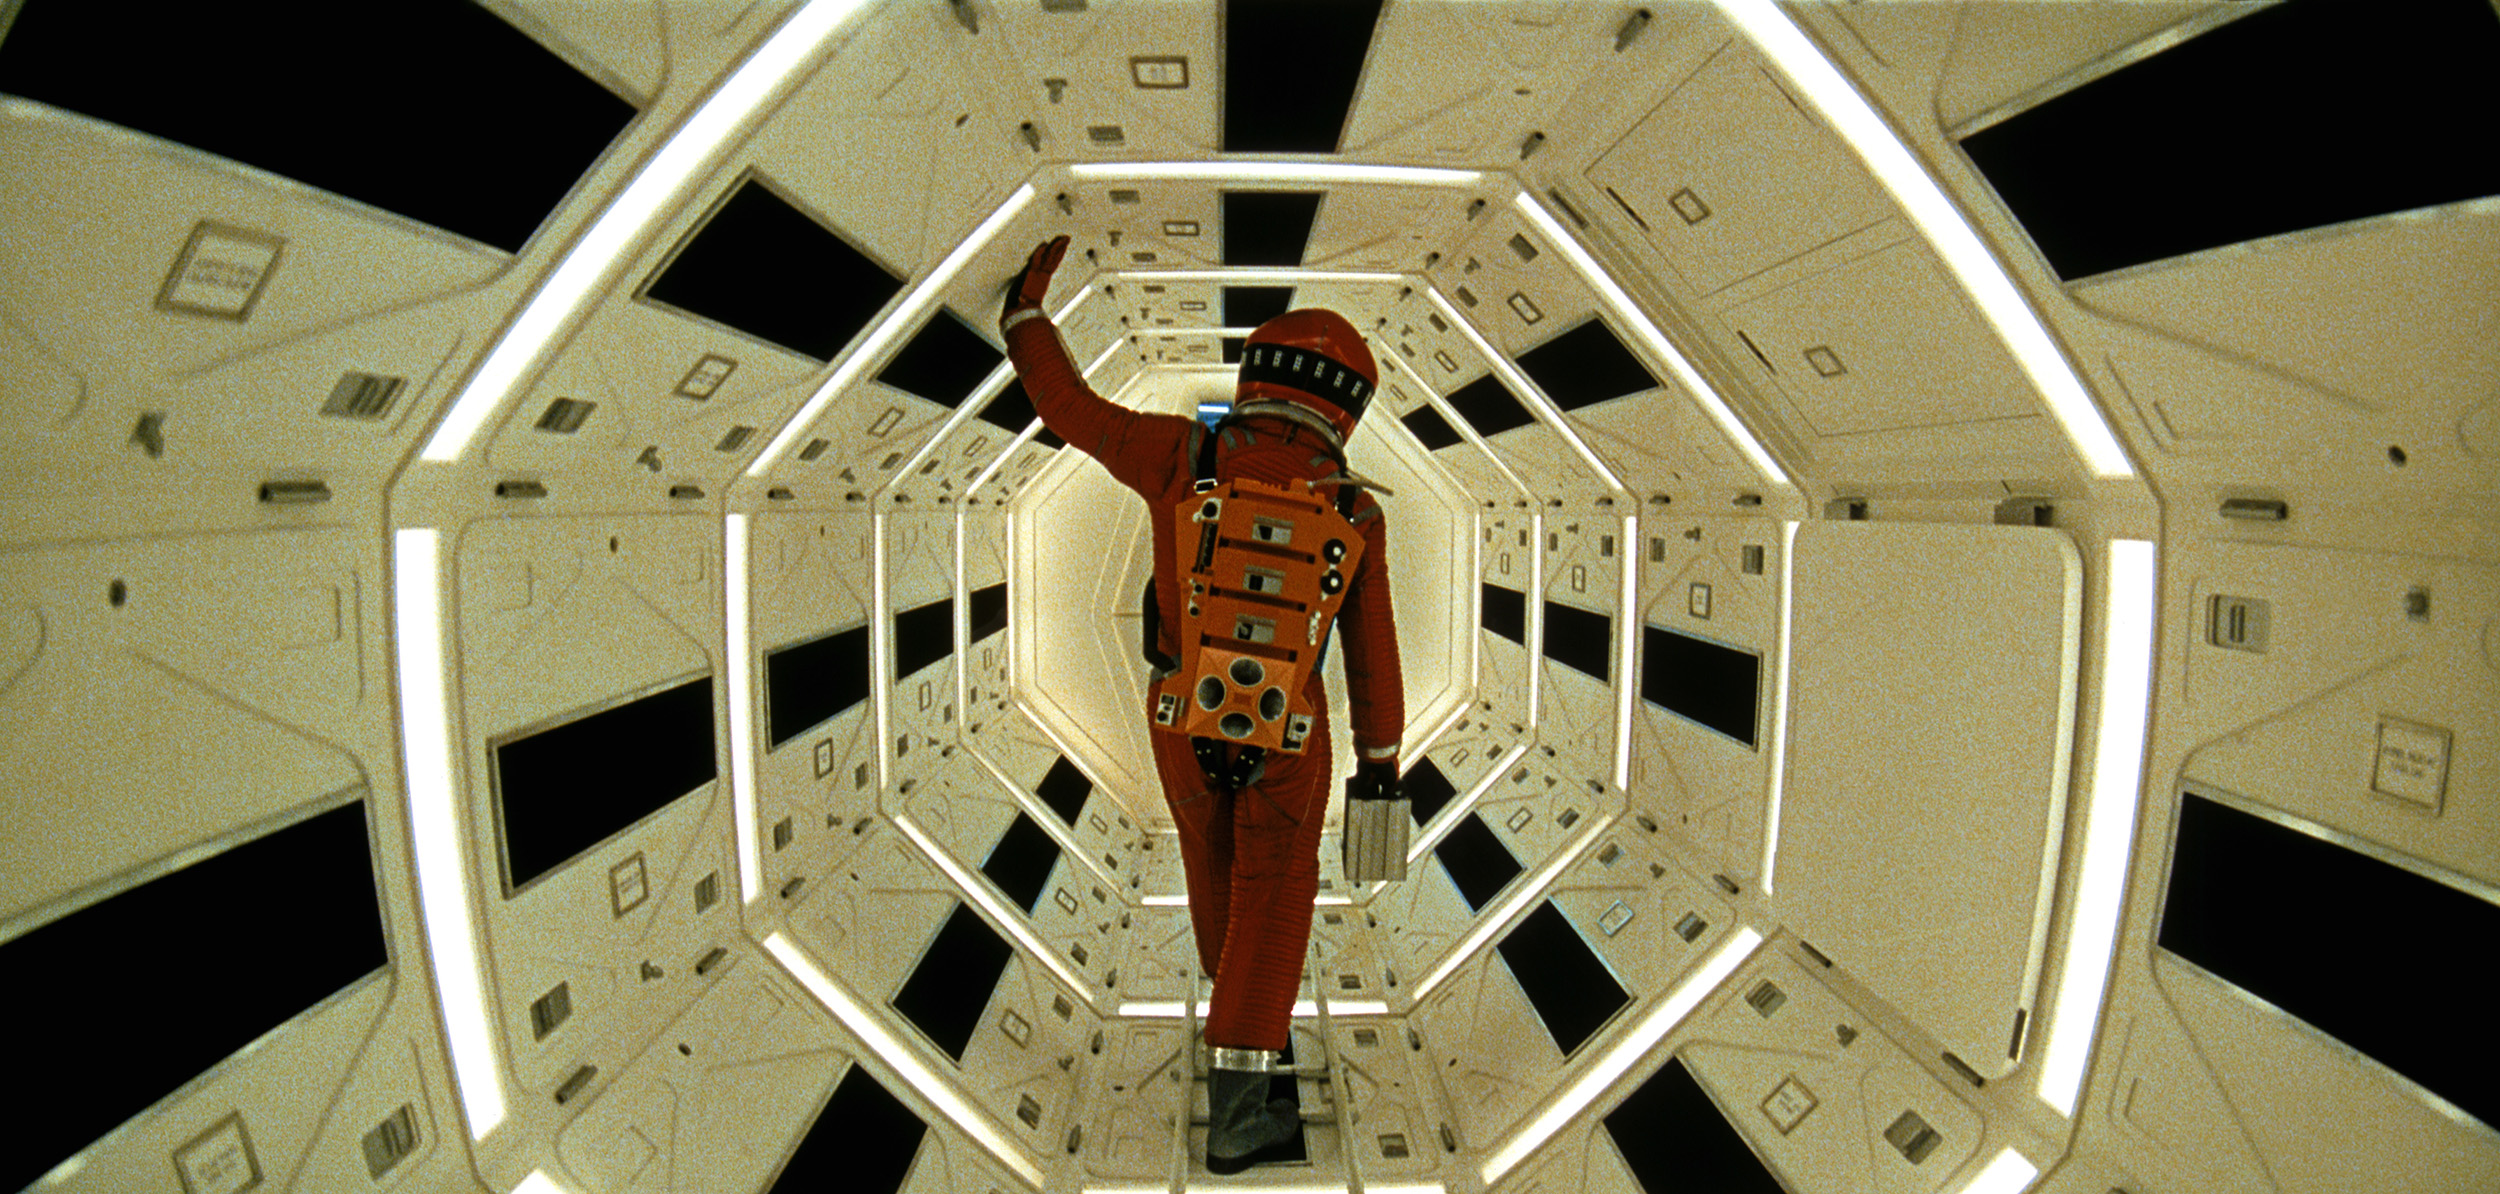 2001: A Space Odyssey's iconic music, explained - Vox